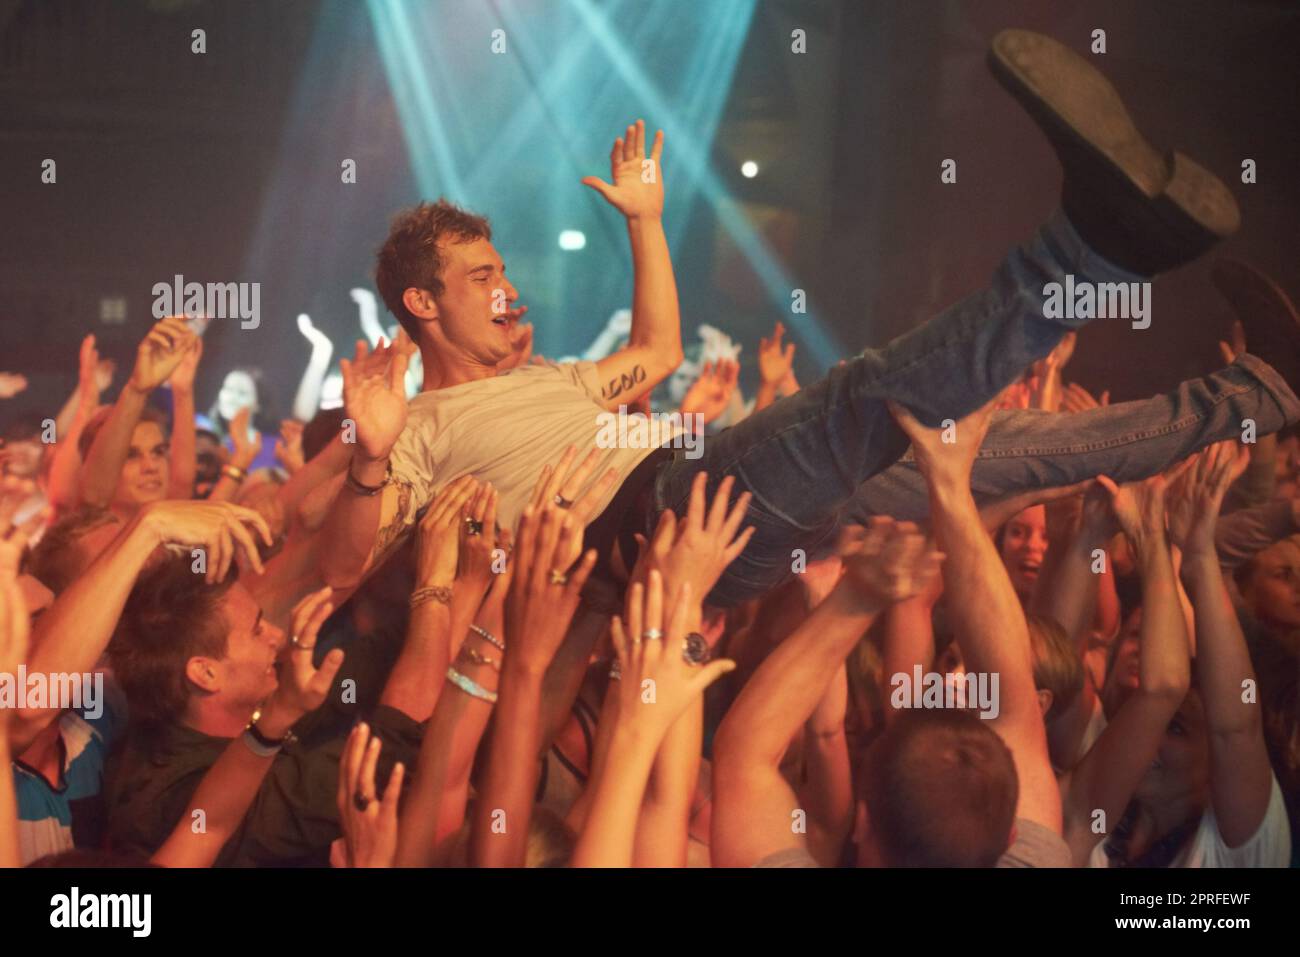 Wild music moves. a man crowd surfing at a music festival Stock Photo